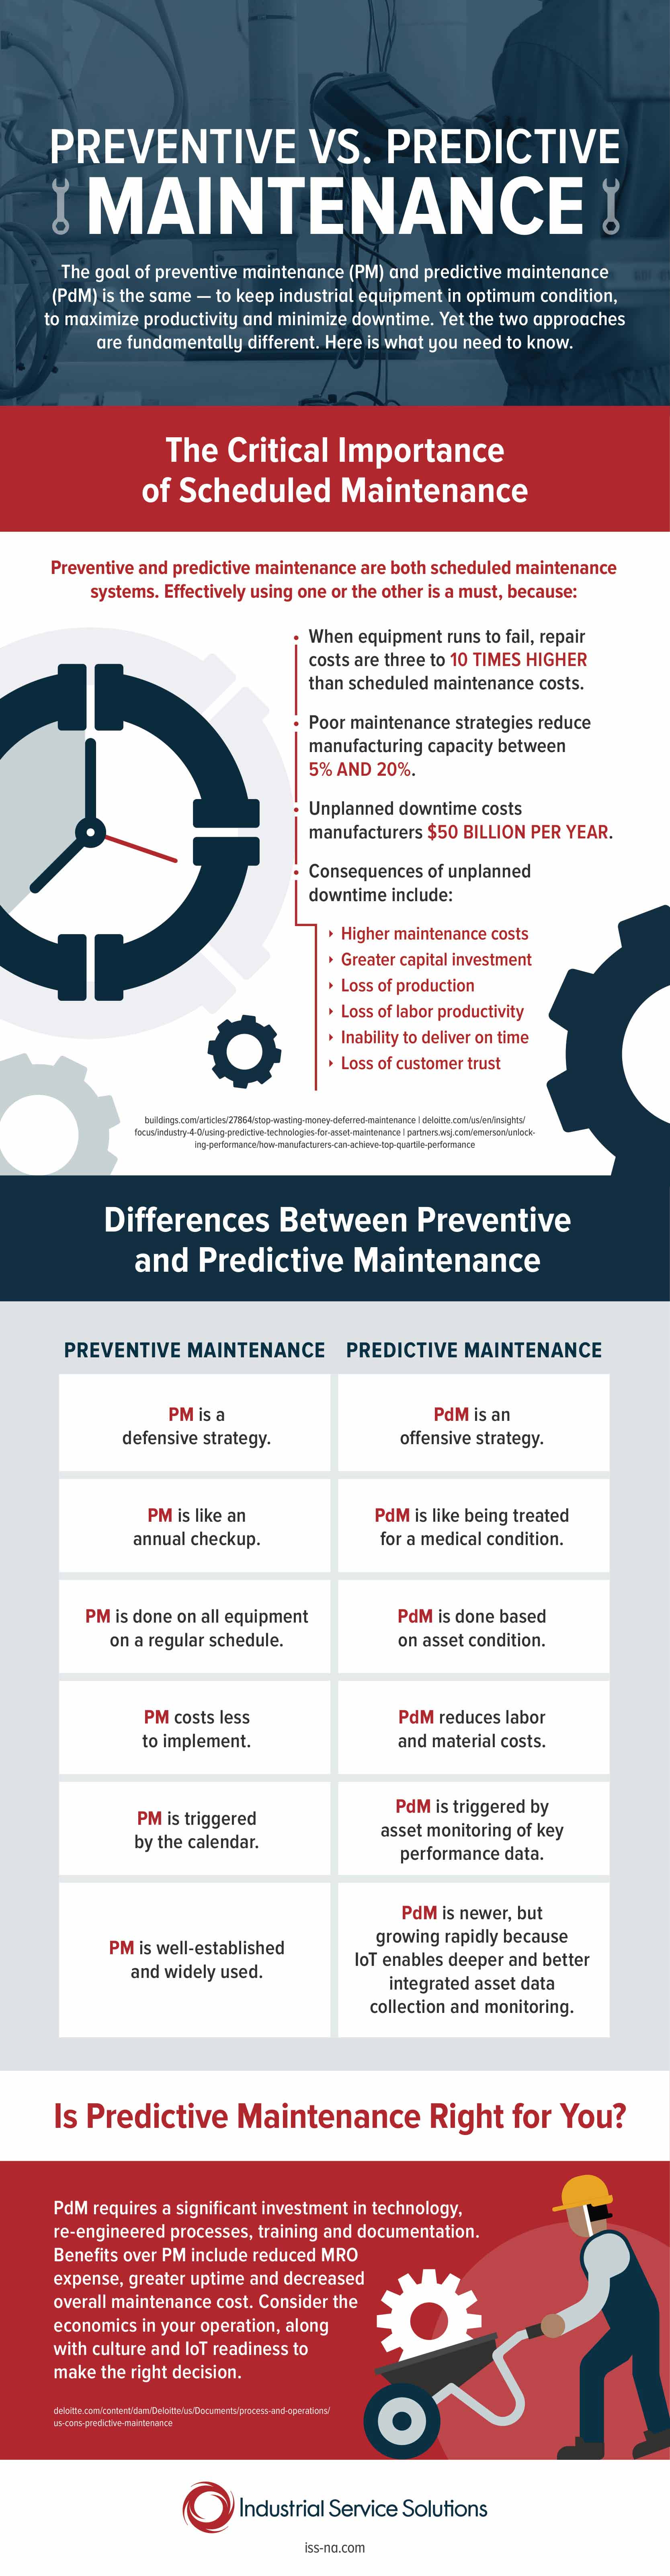 Predictive Vs Preventive Maintenance Infographic Iss2 1, Industry Today